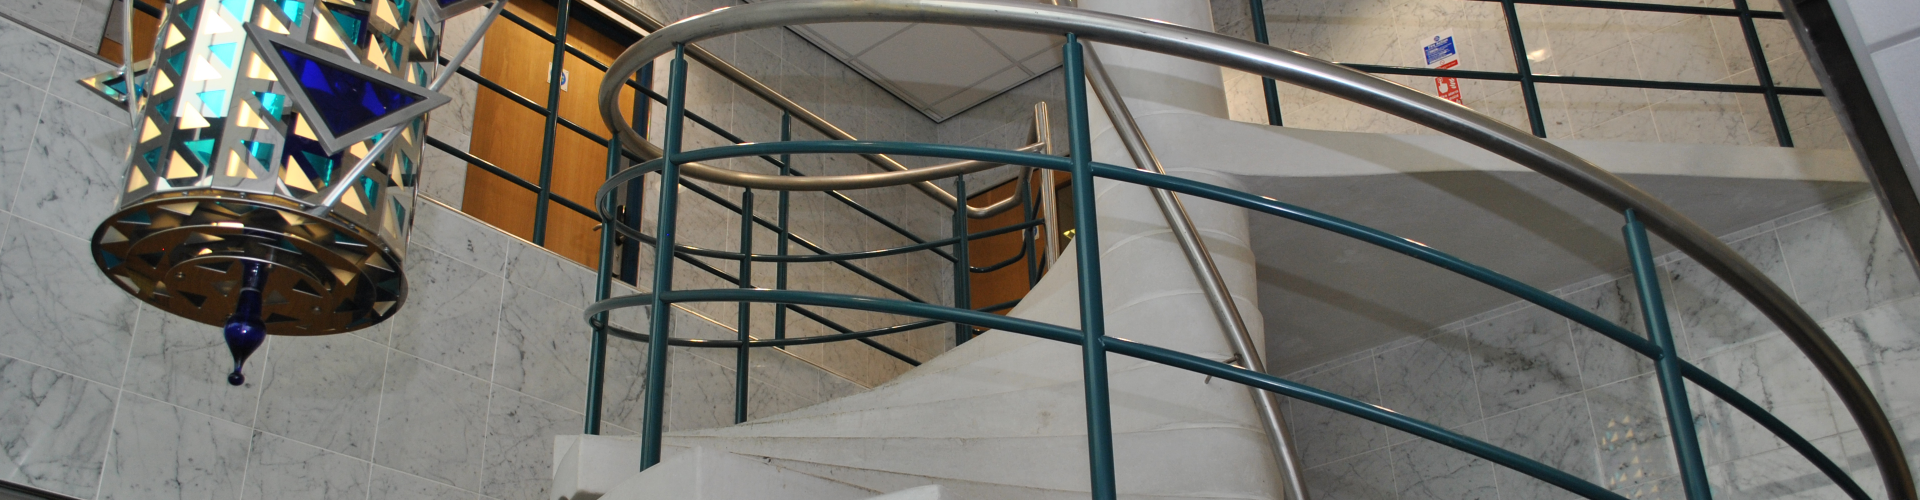 Image of stairway at Europa House.